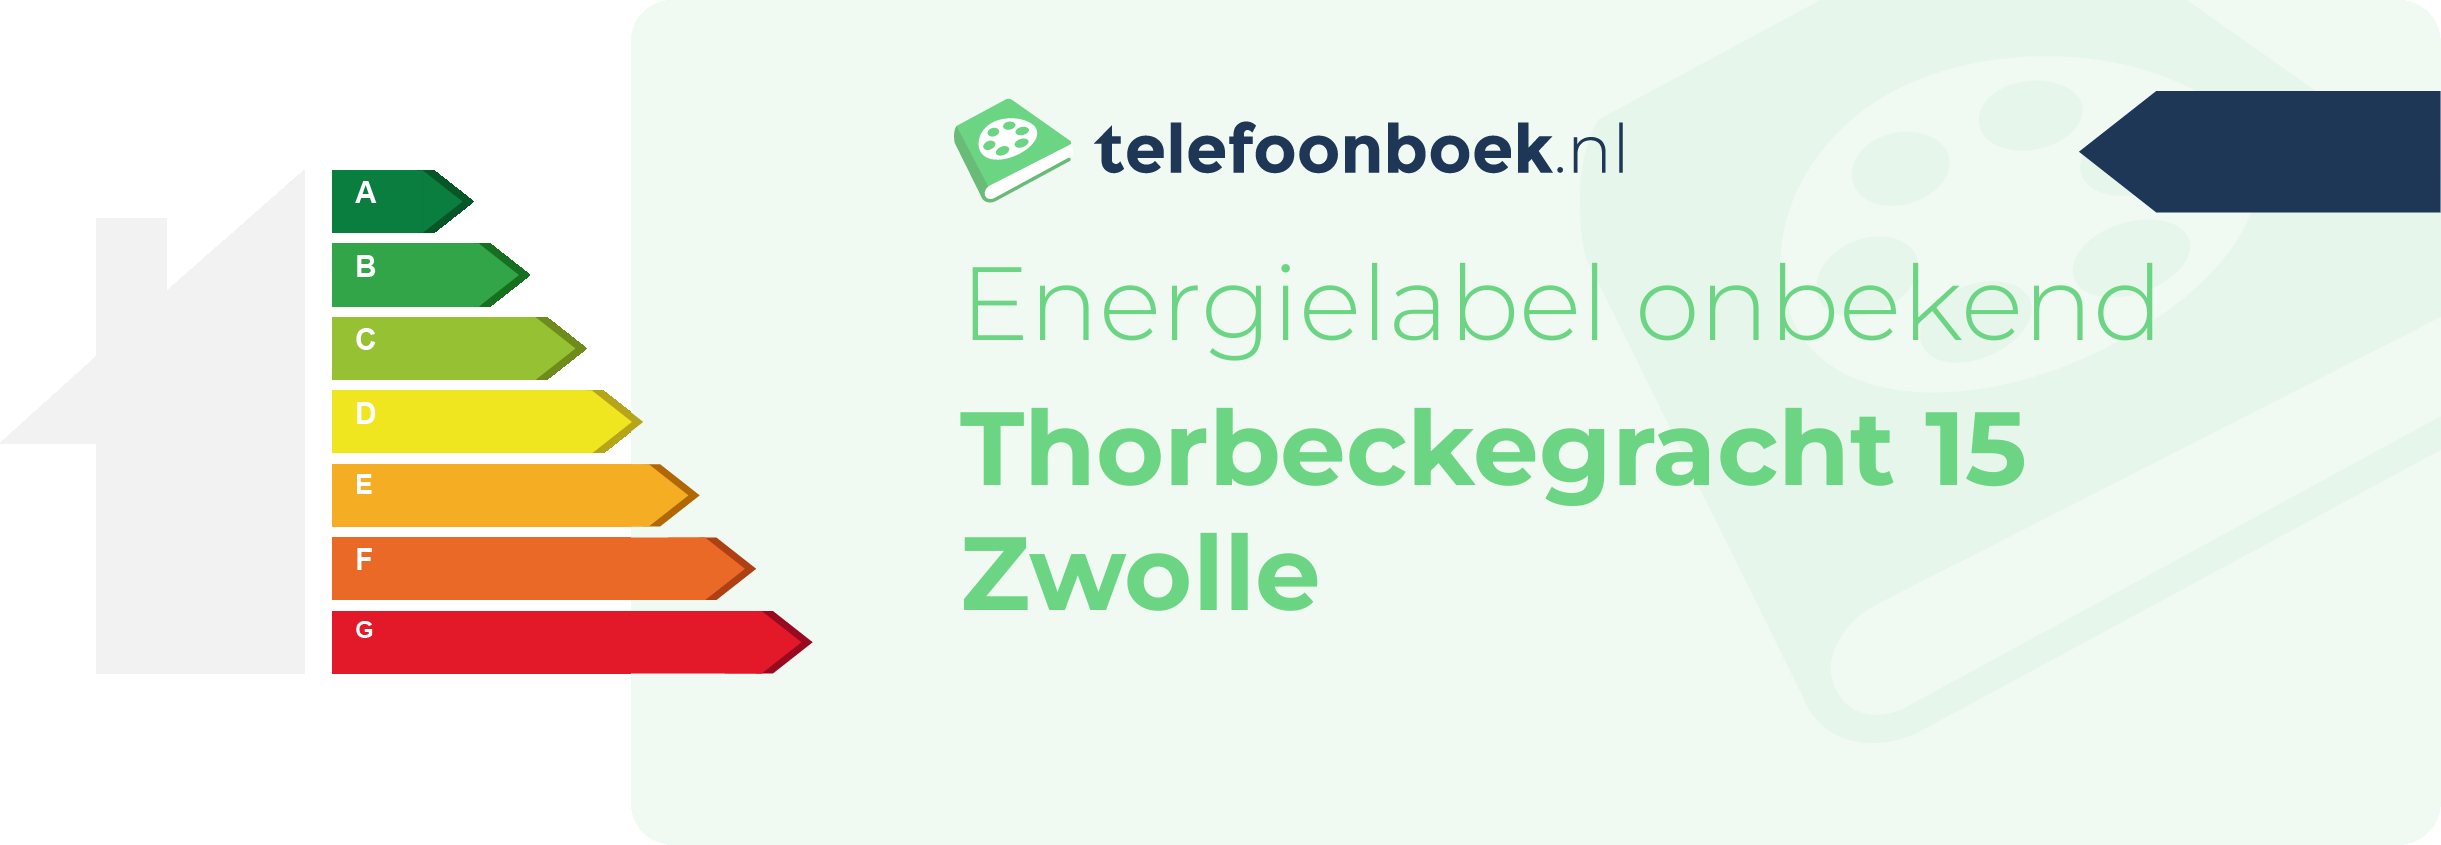 Energielabel Thorbeckegracht 15 Zwolle